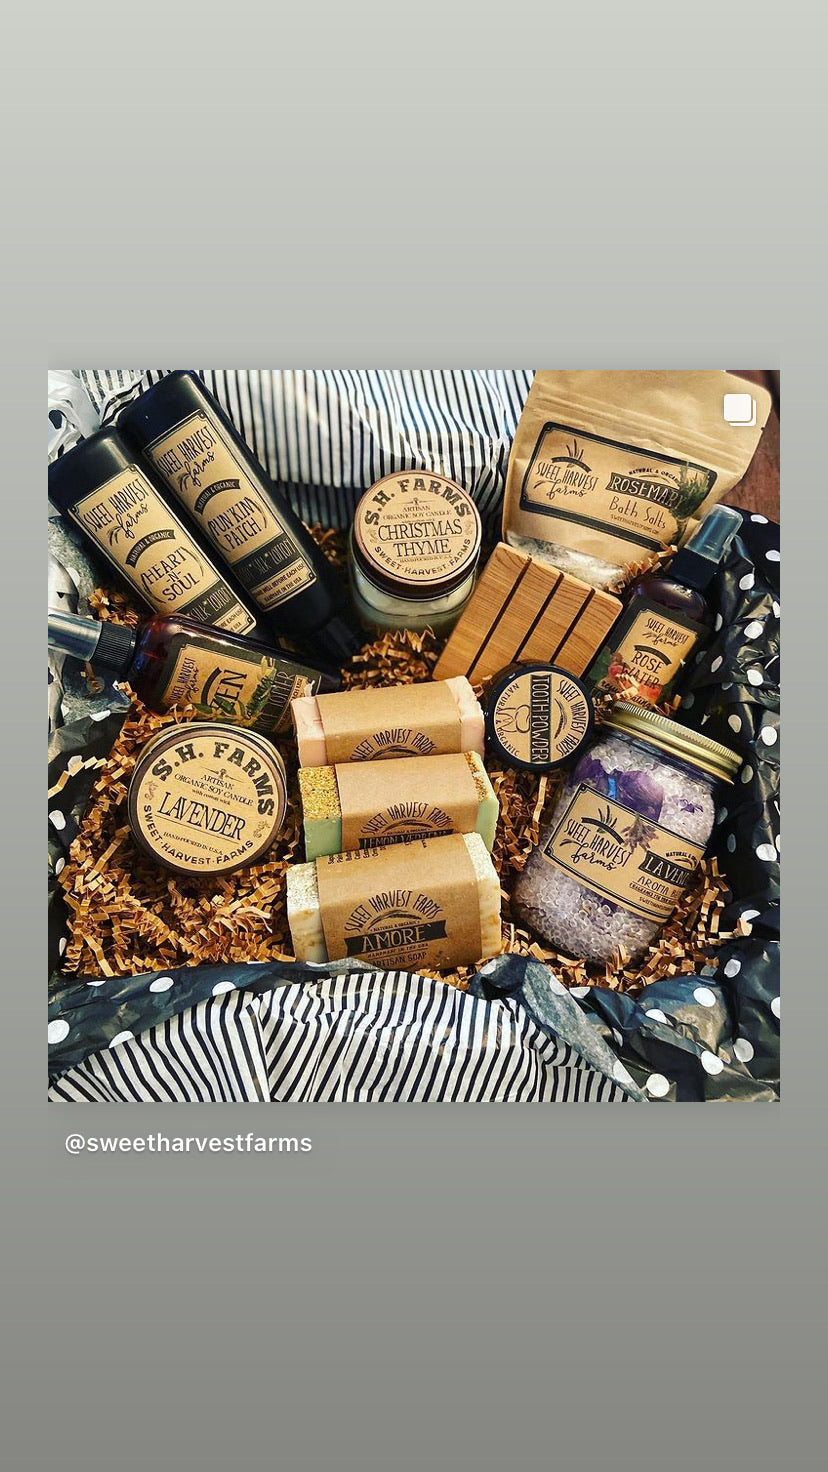 Receive  a box full of organic hand made soap, lotion and more every single month with this soap of the month club! Big box at 6th month full or organic handmade soap, lotions, bath salts and more! 